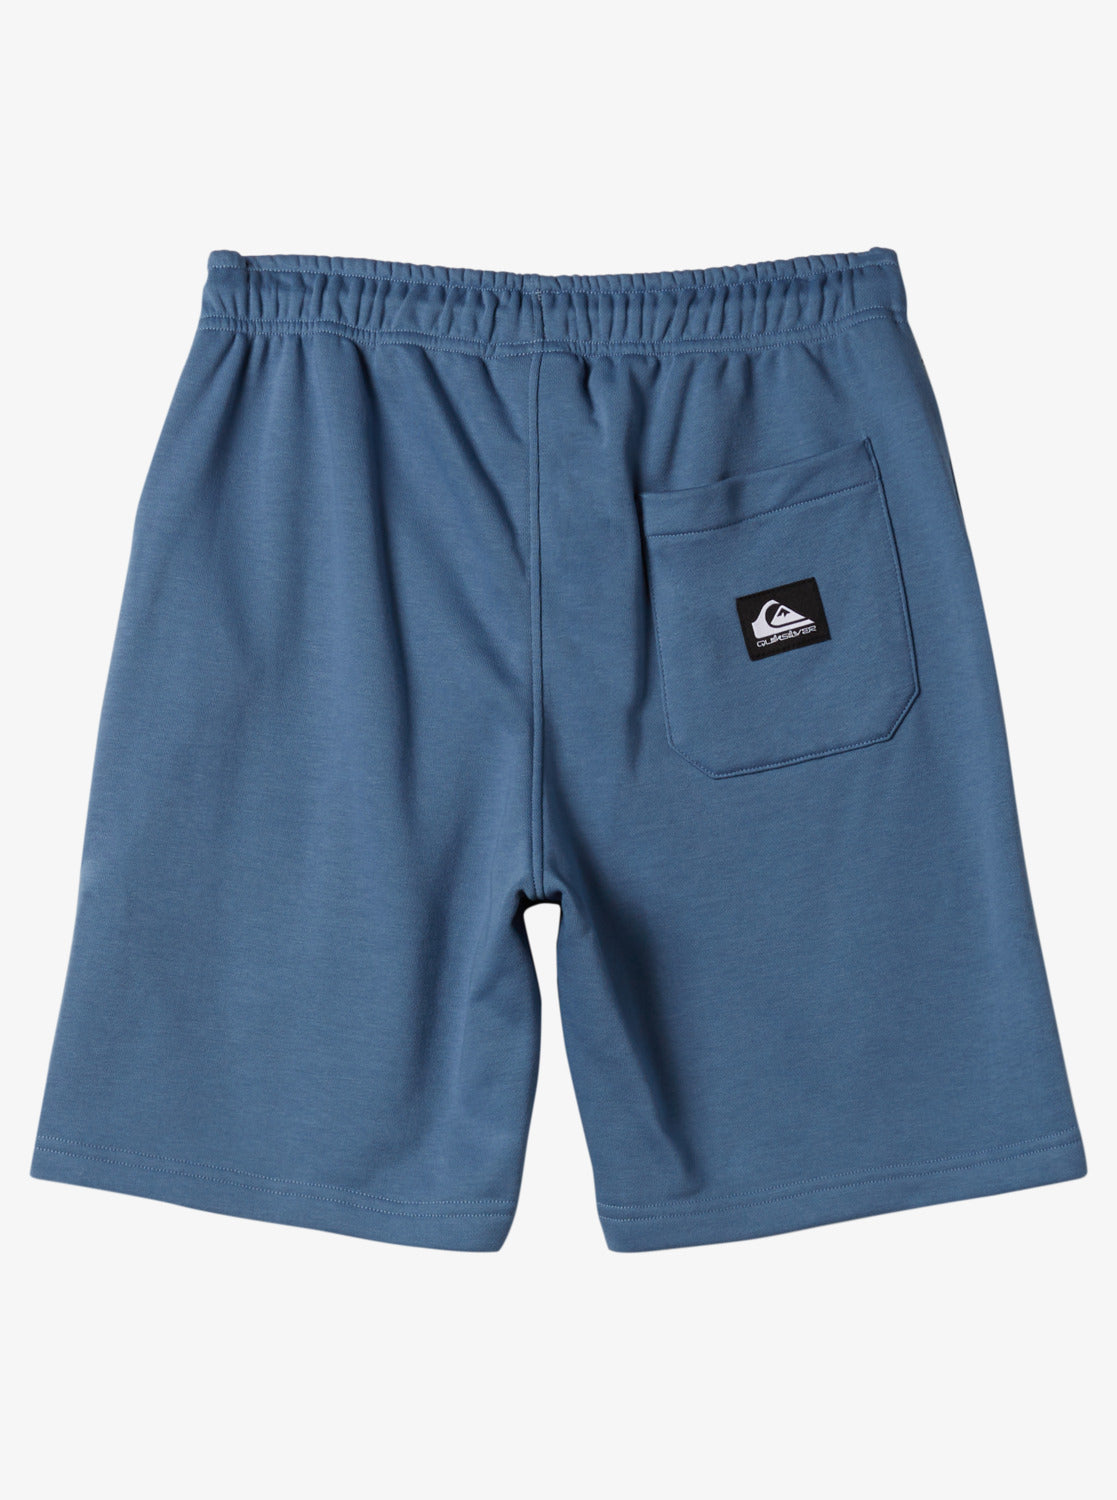 Quiksilver Easy Day Boys Sweat Shorts in Blue Shadow